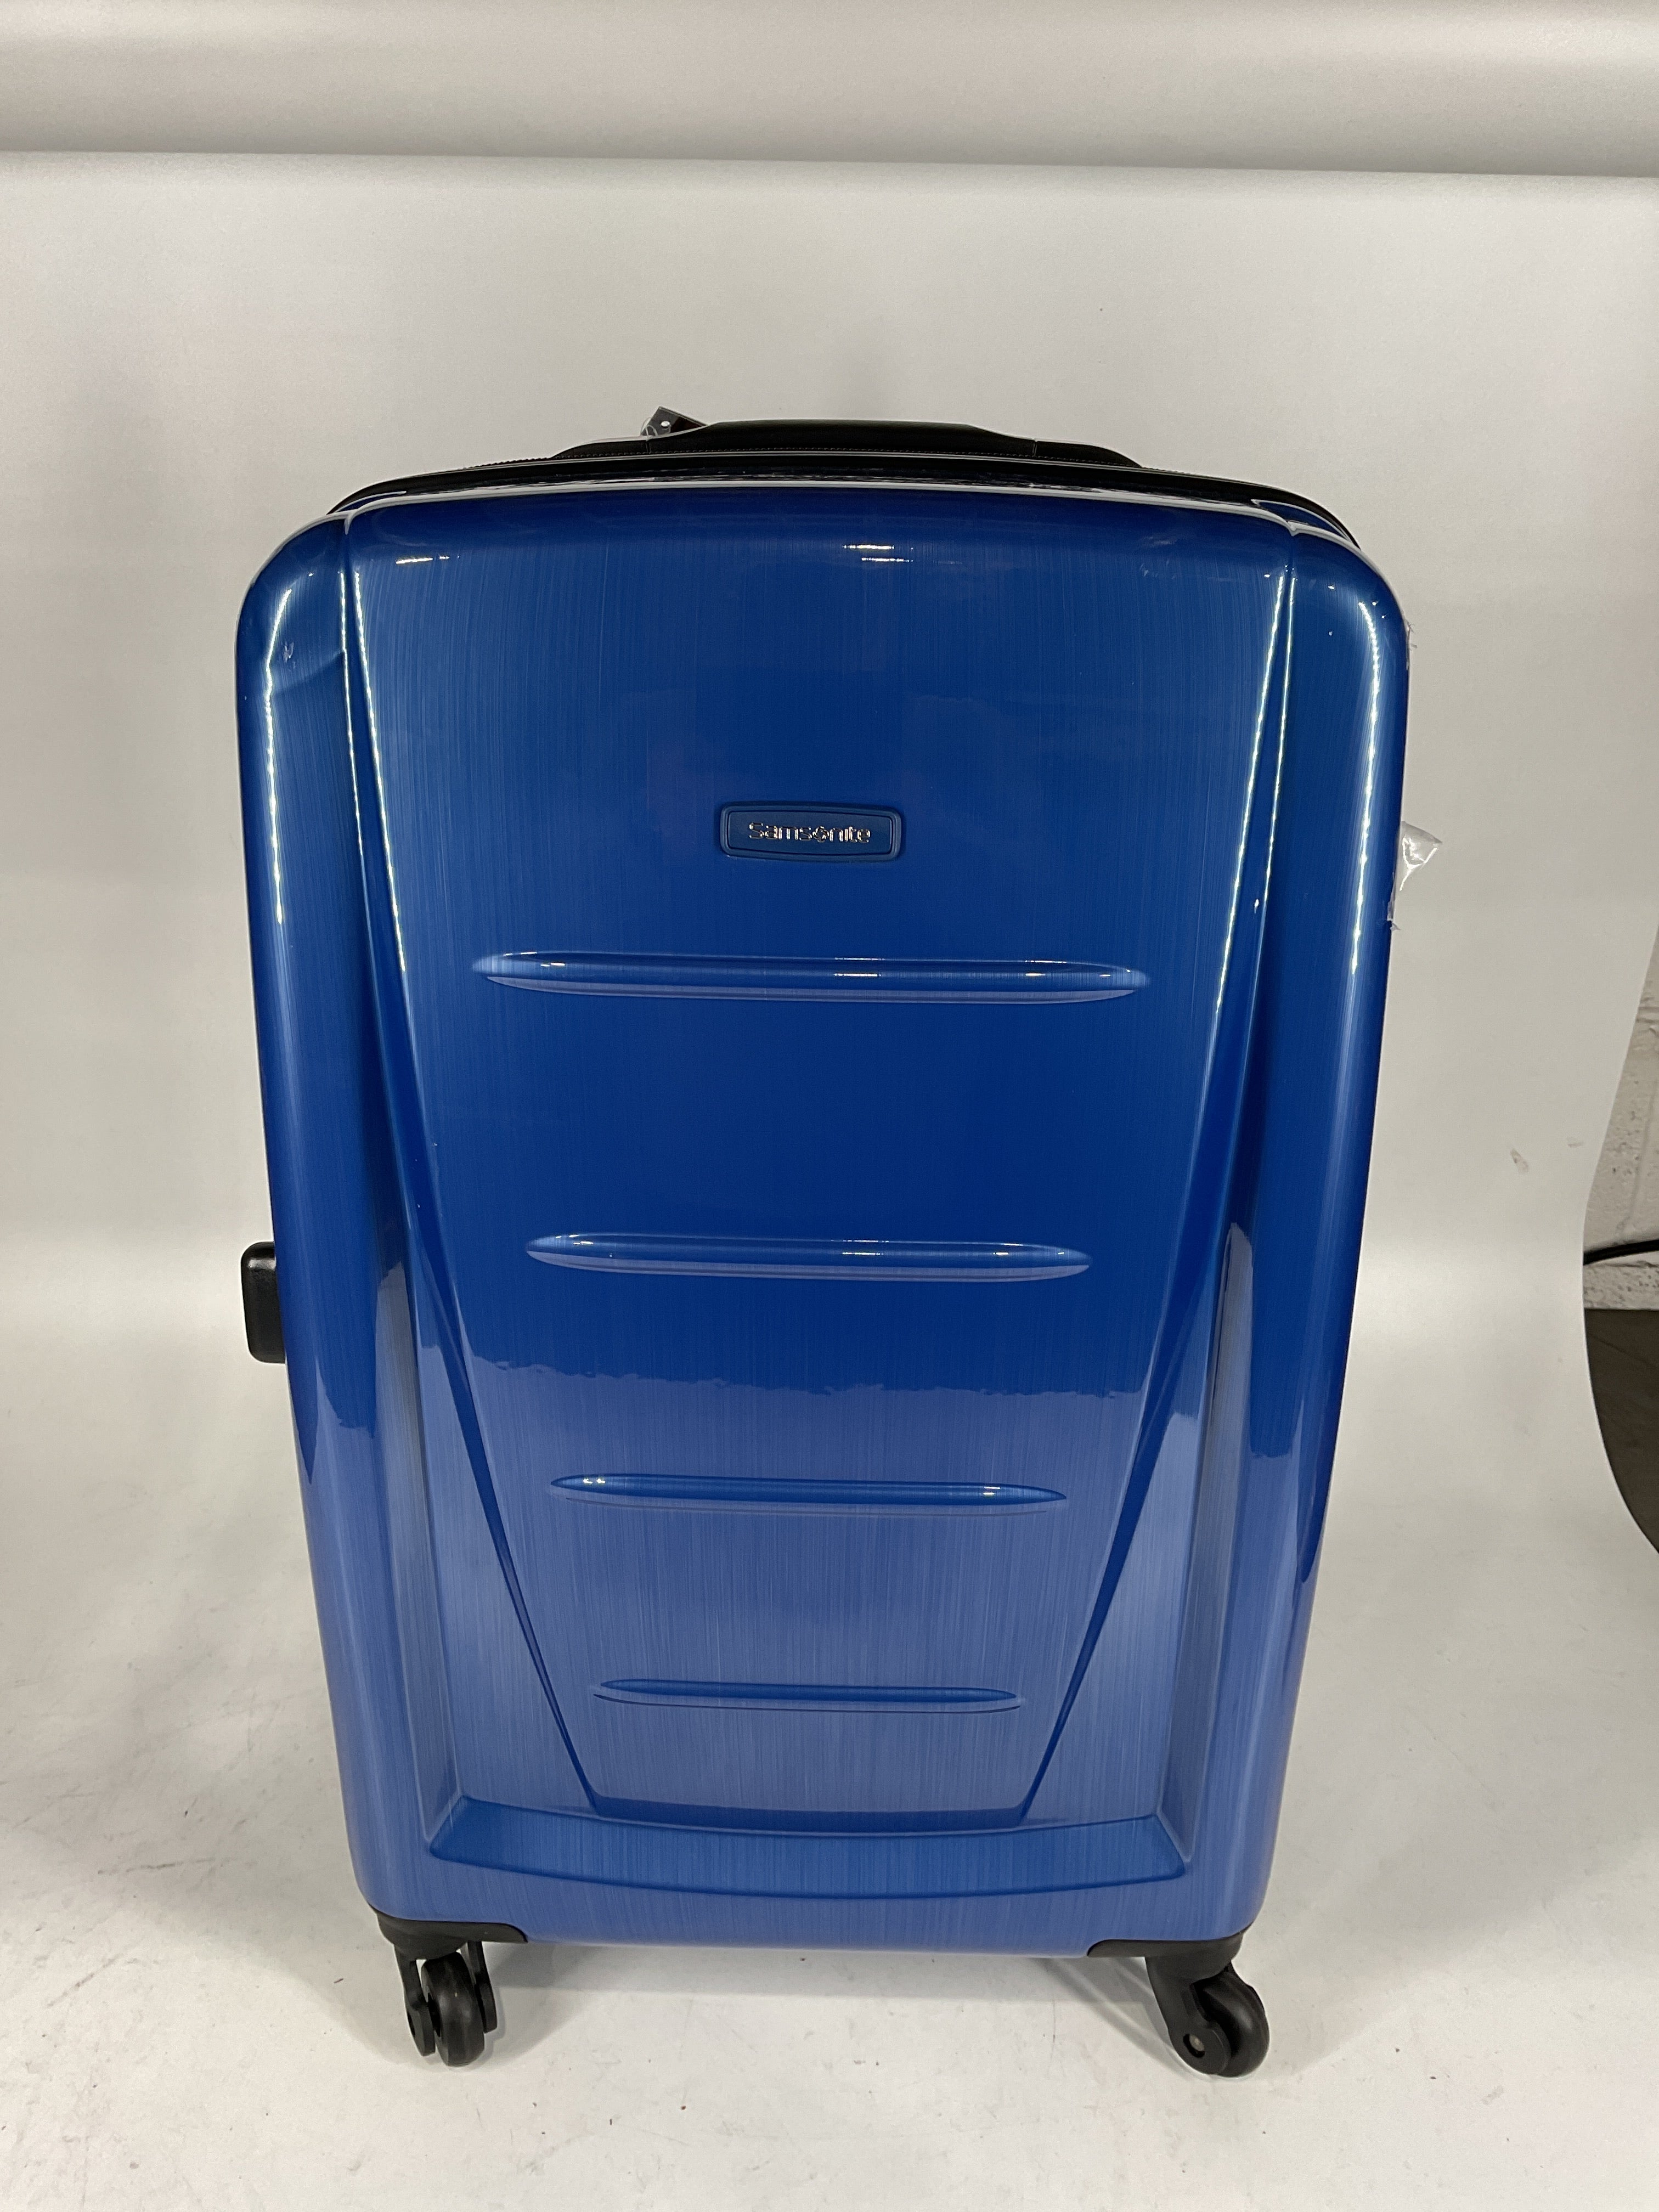 Samsonite Winfield 2 Hardside Luggage with Spinner Wheels - Nordic Blue/Checked-Medium 24-Inch